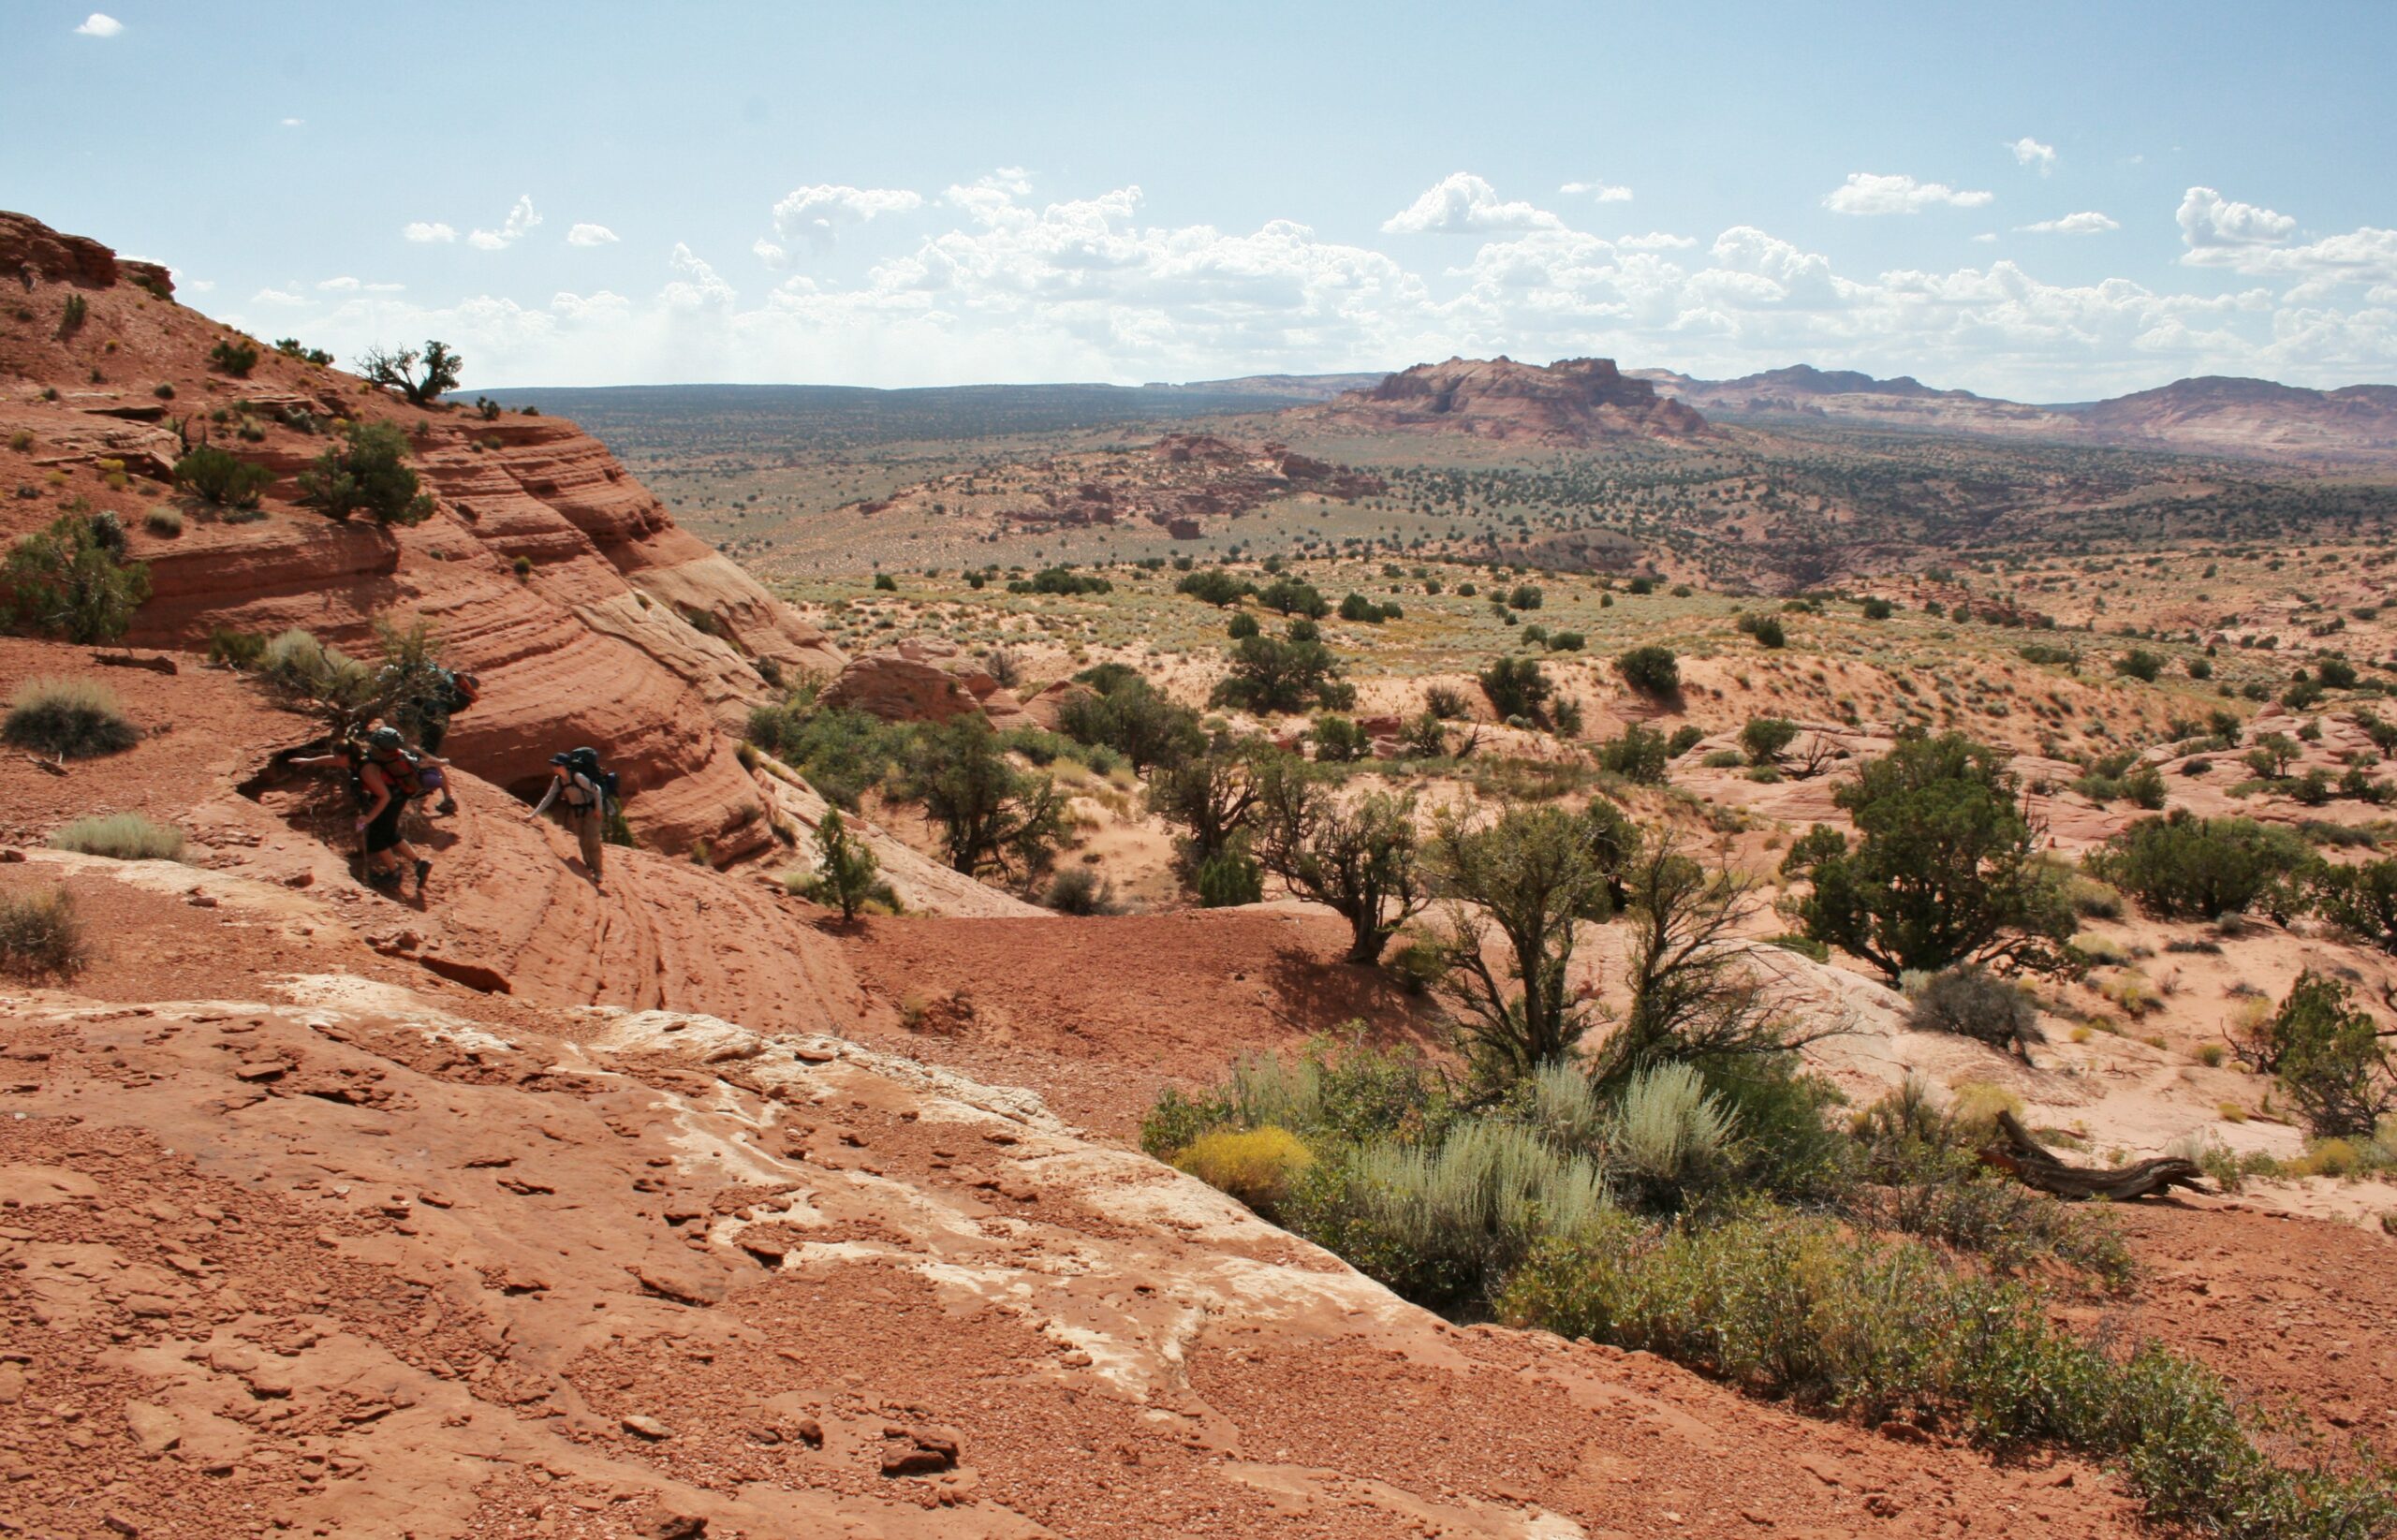 Hikers climb up sandstone formations on the Middle Route near Buckskin Gulch.